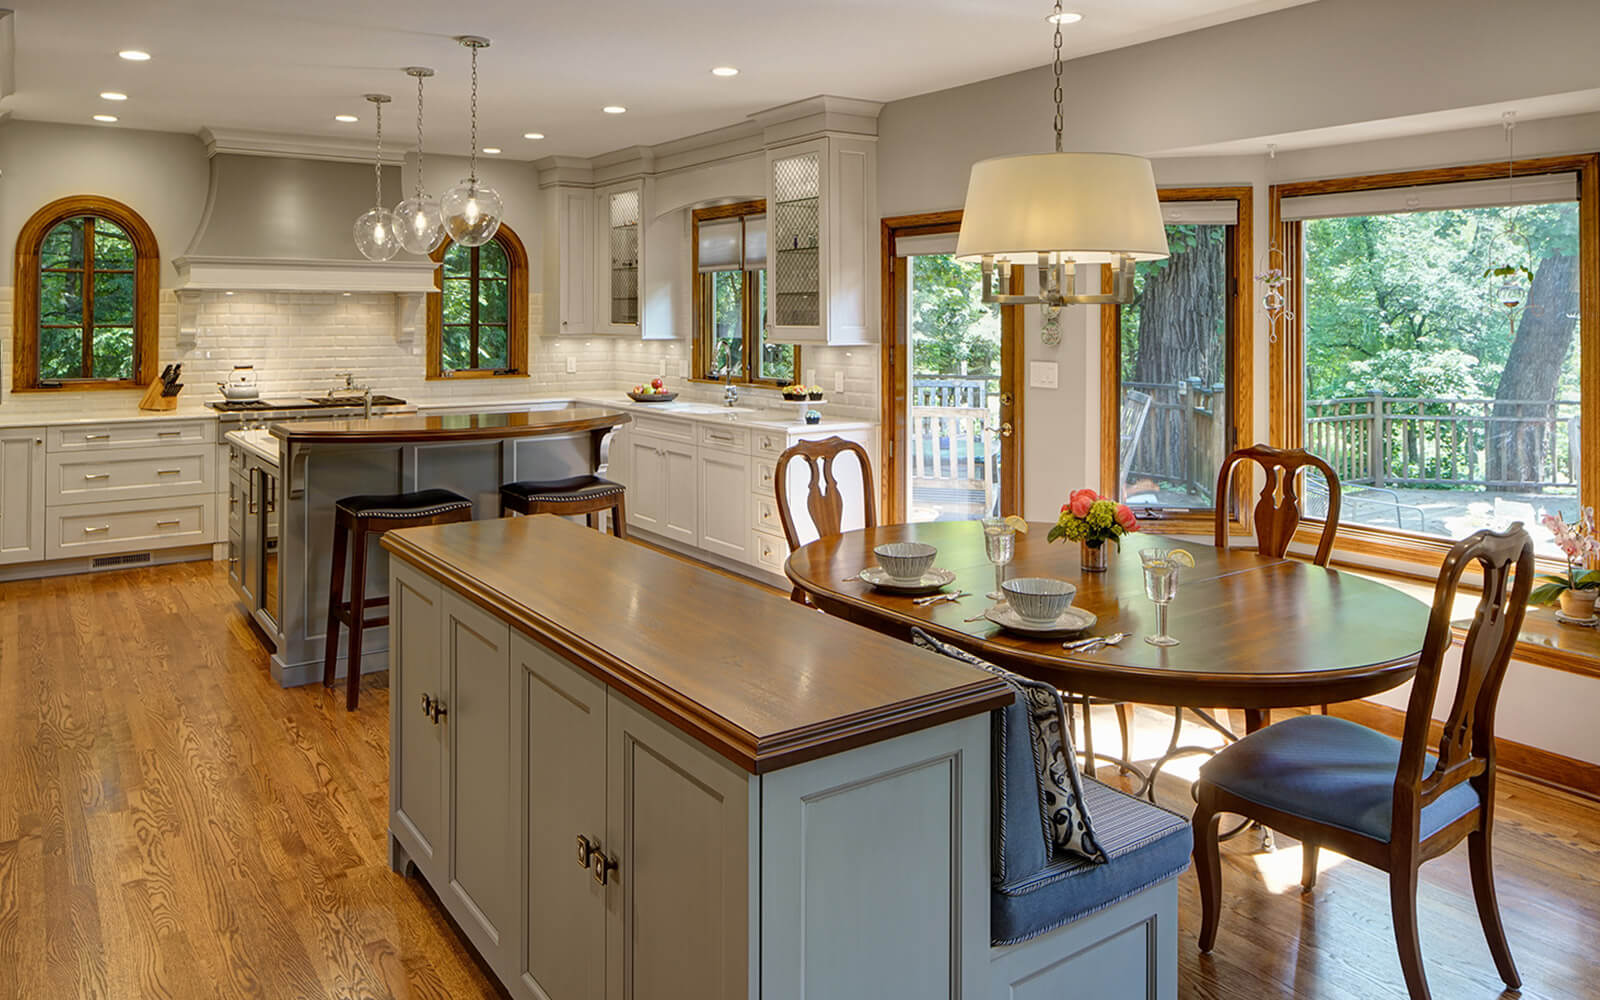 A traditional naperville kitchen featuring an open floor plan layout